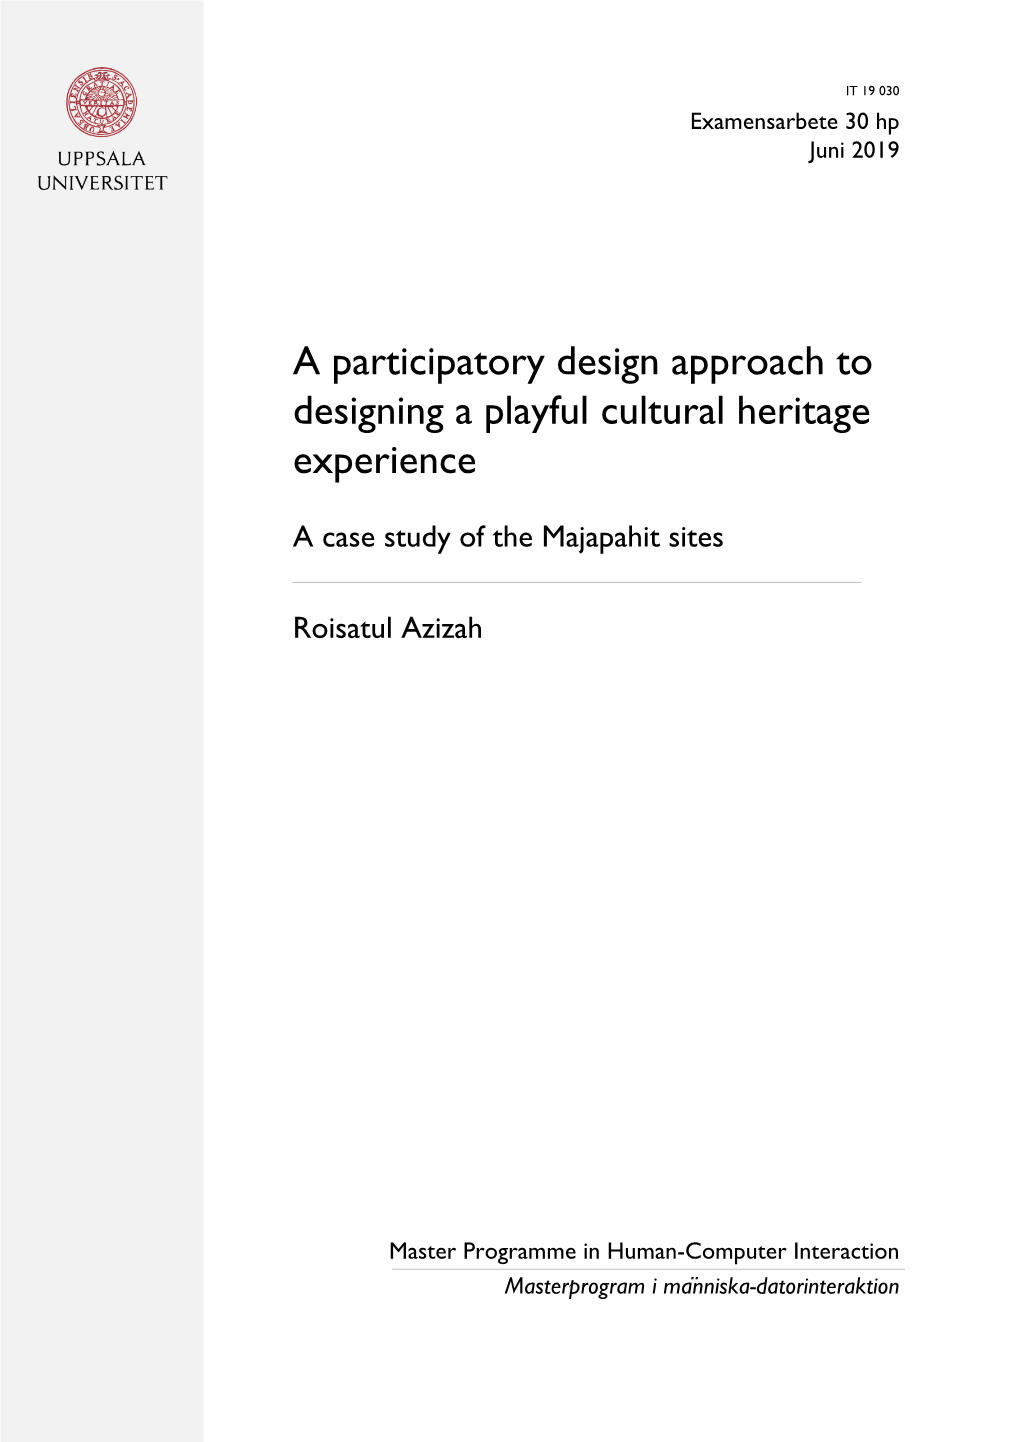 A Participatory Design Approach to Designing a Playful Cultural Heritage Experience